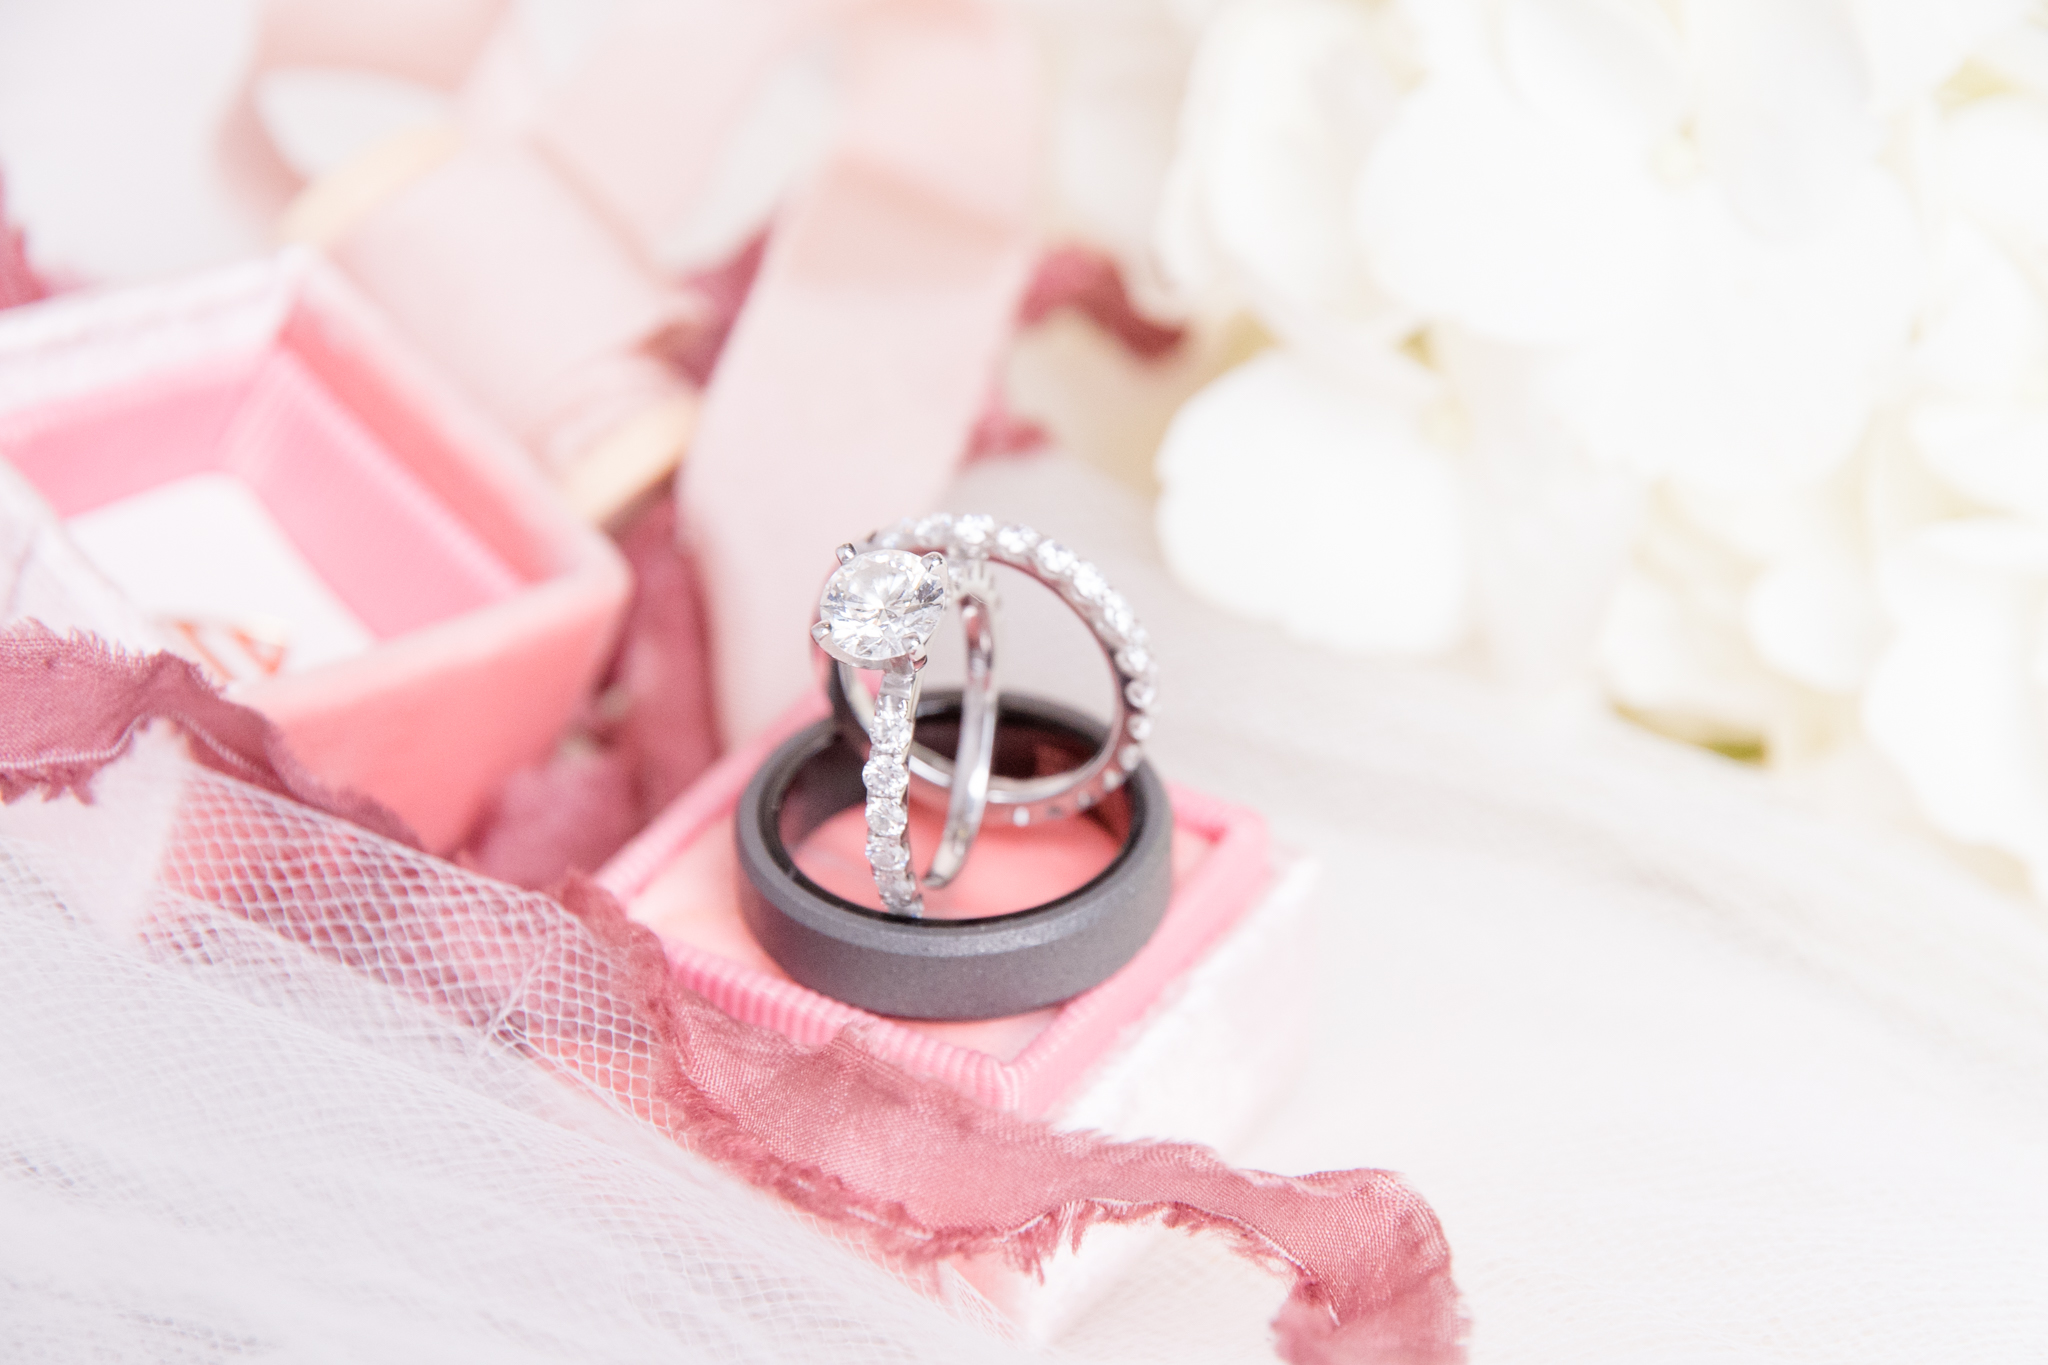 Enagement ring sits with ribbon and flowers.